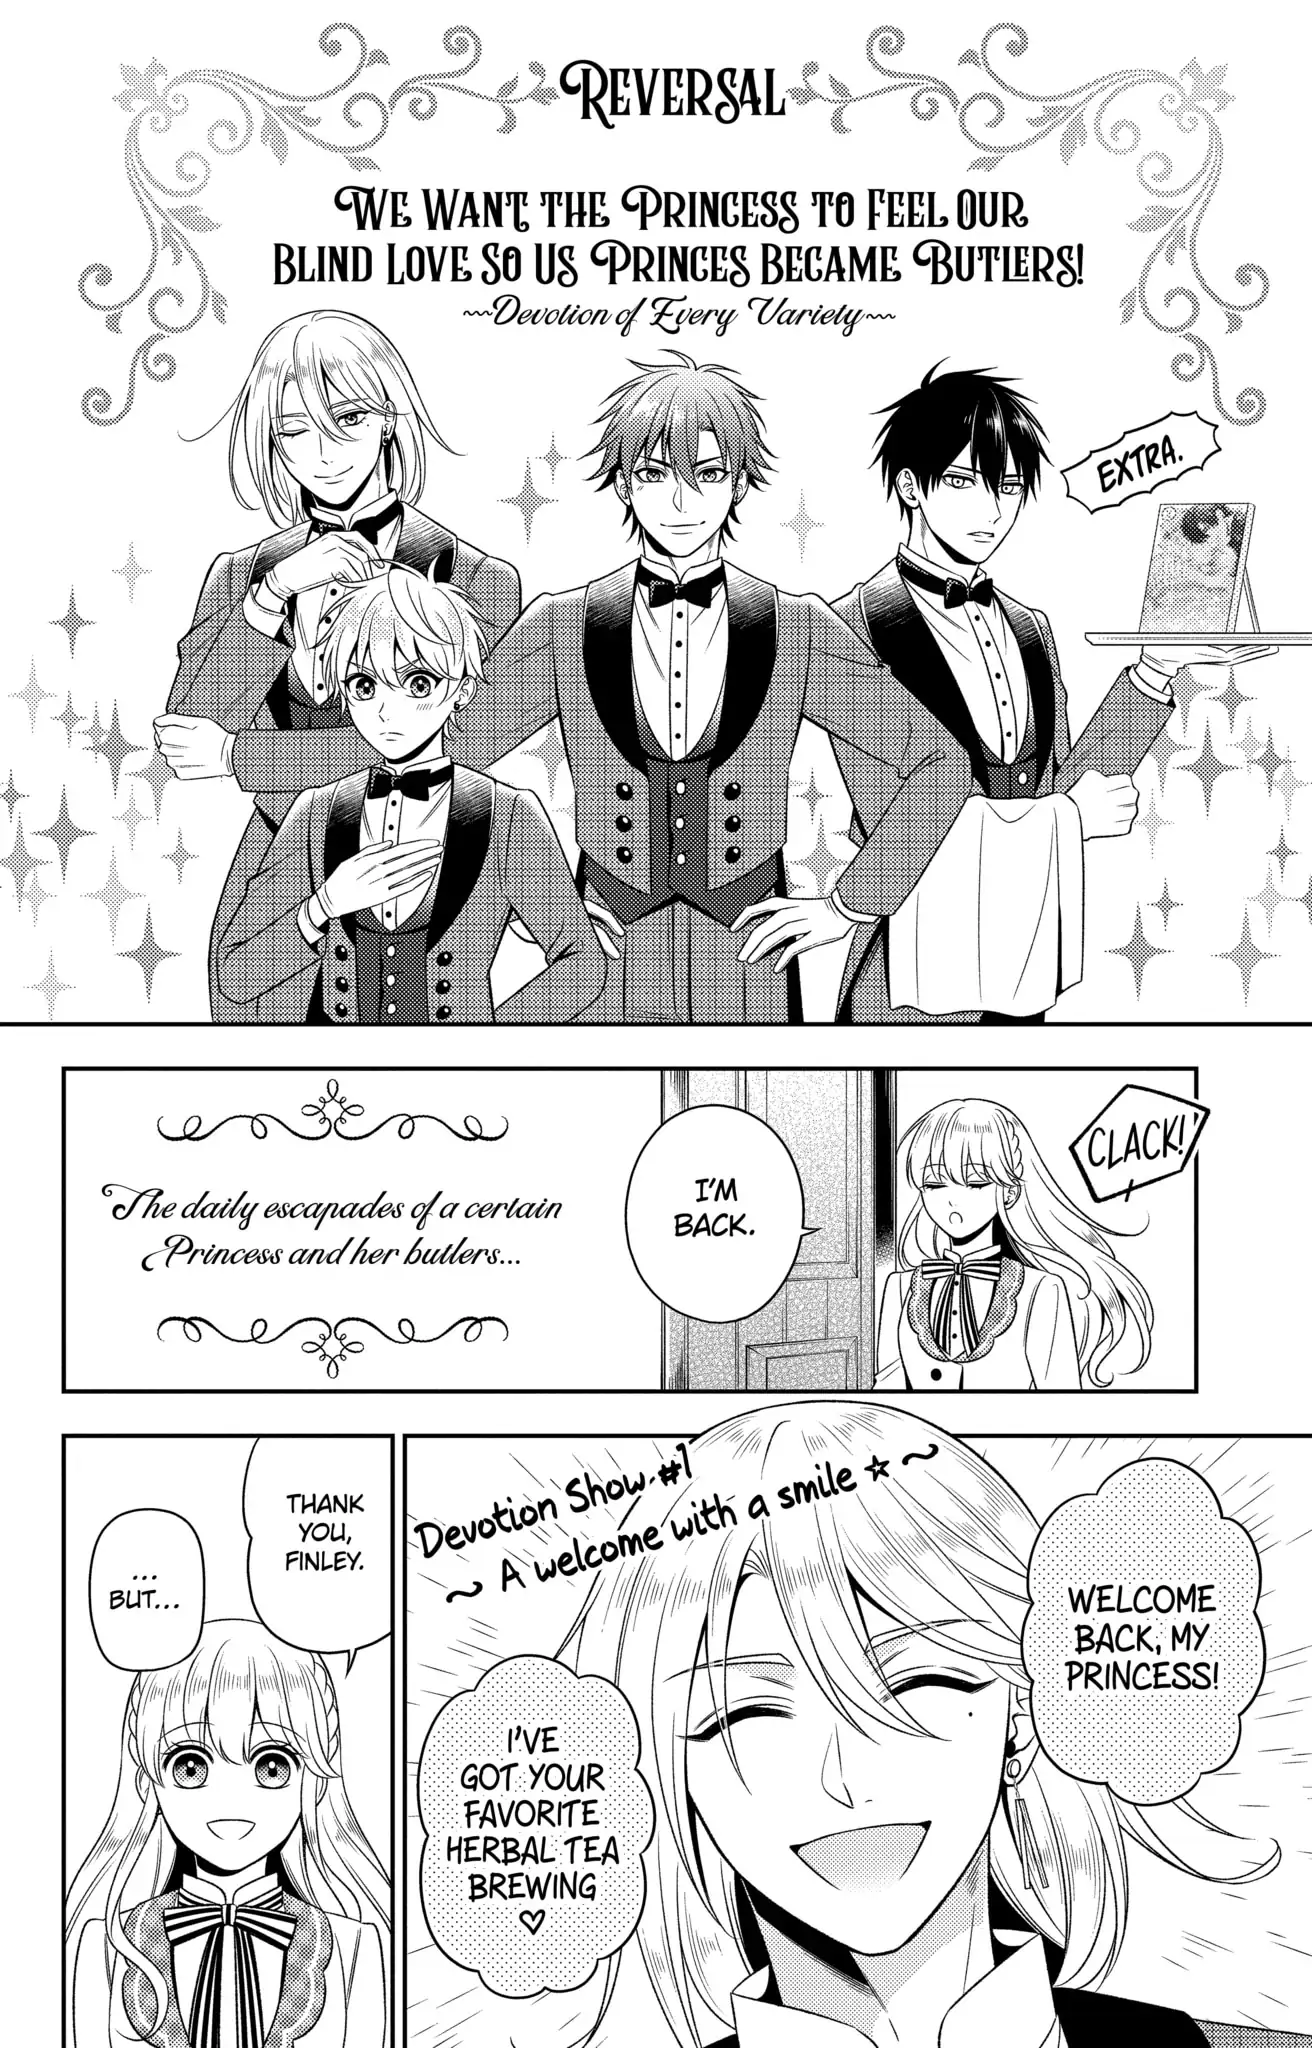 Disguised As A Butler The Former Princess Evades The Prince’S Love! - Page 1